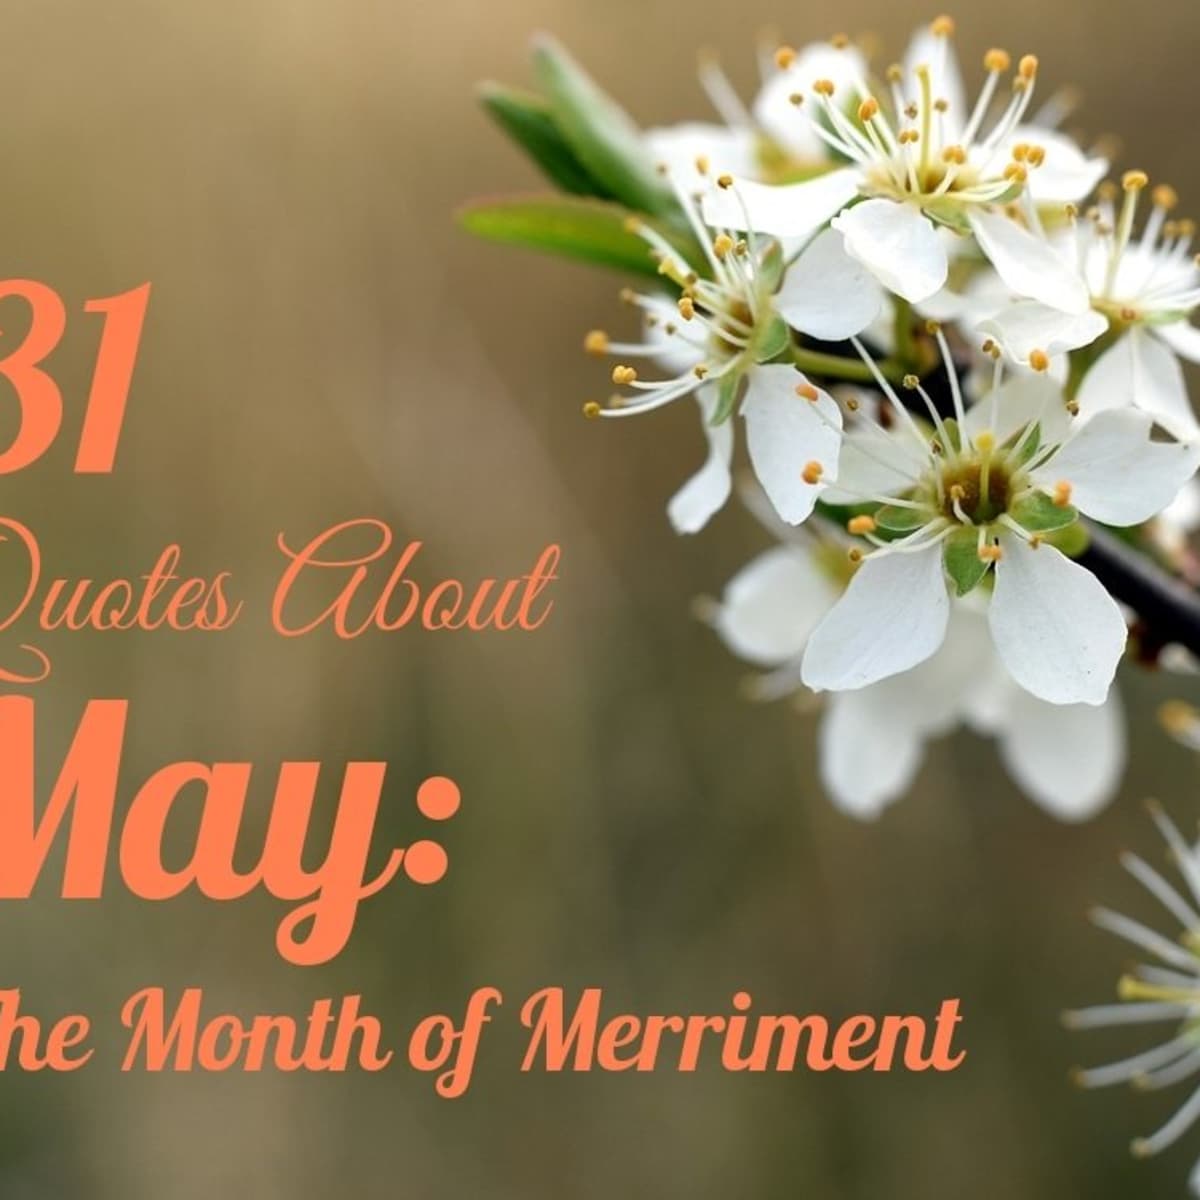 31 Quotes and Poems About May: The Month of Merriment - Holidappy